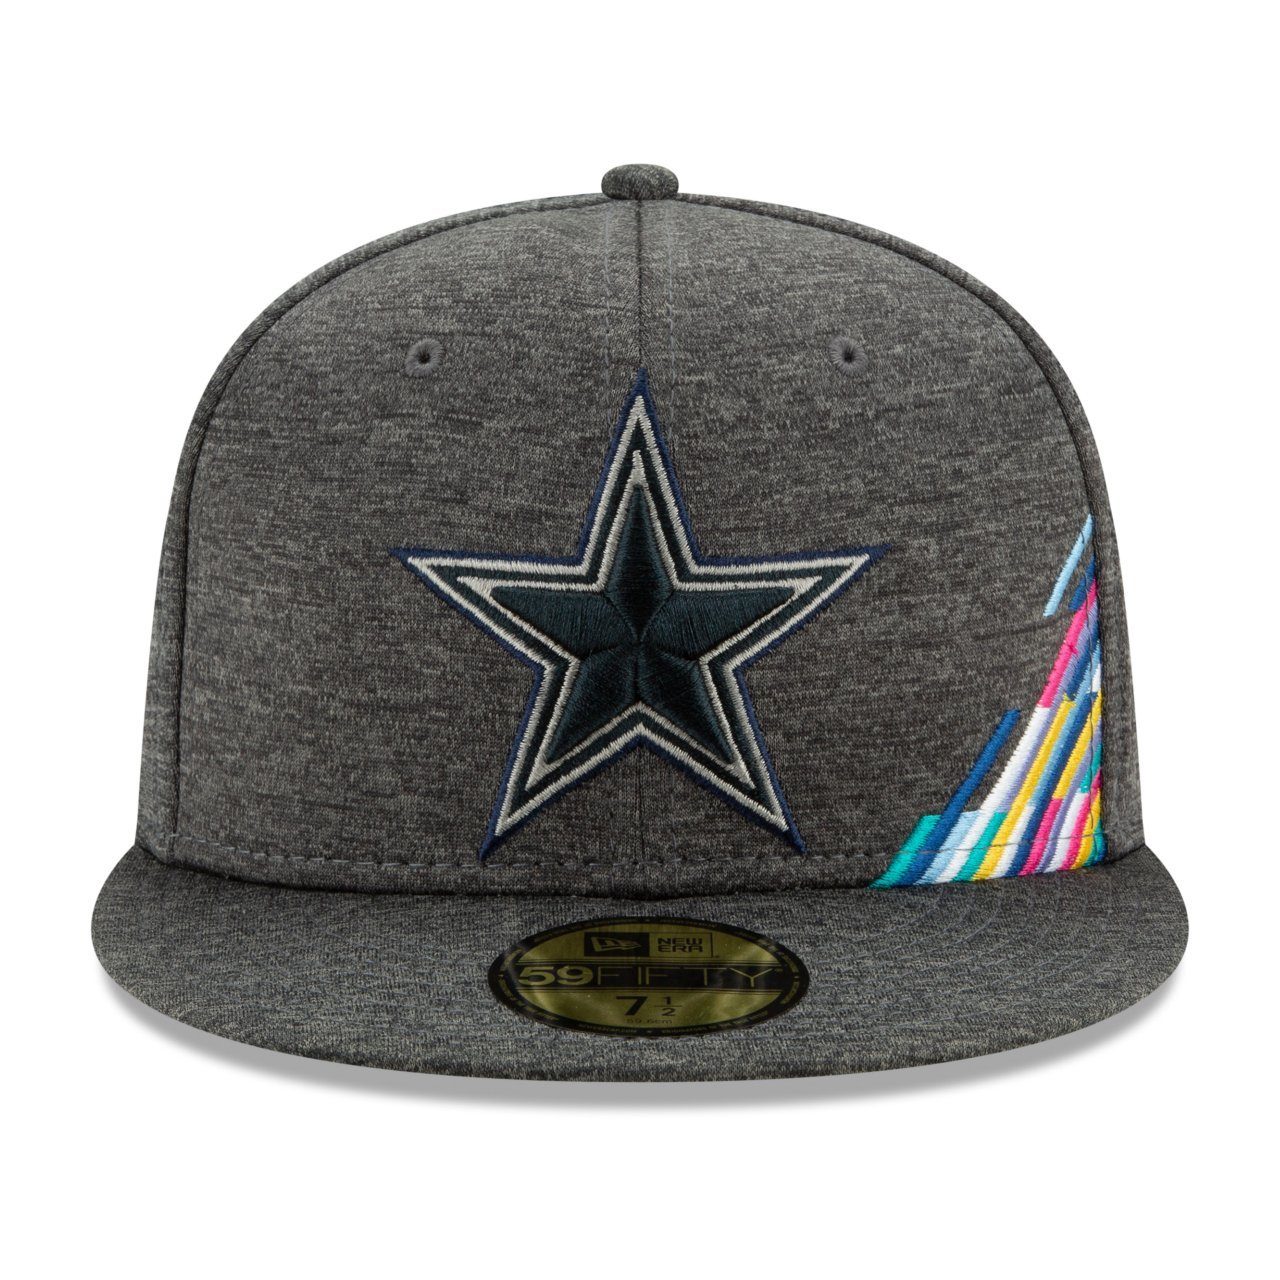 CATCH Cap CRUCIAL New Cowboys Teams Dallas Era Fitted NFL 59Fifty